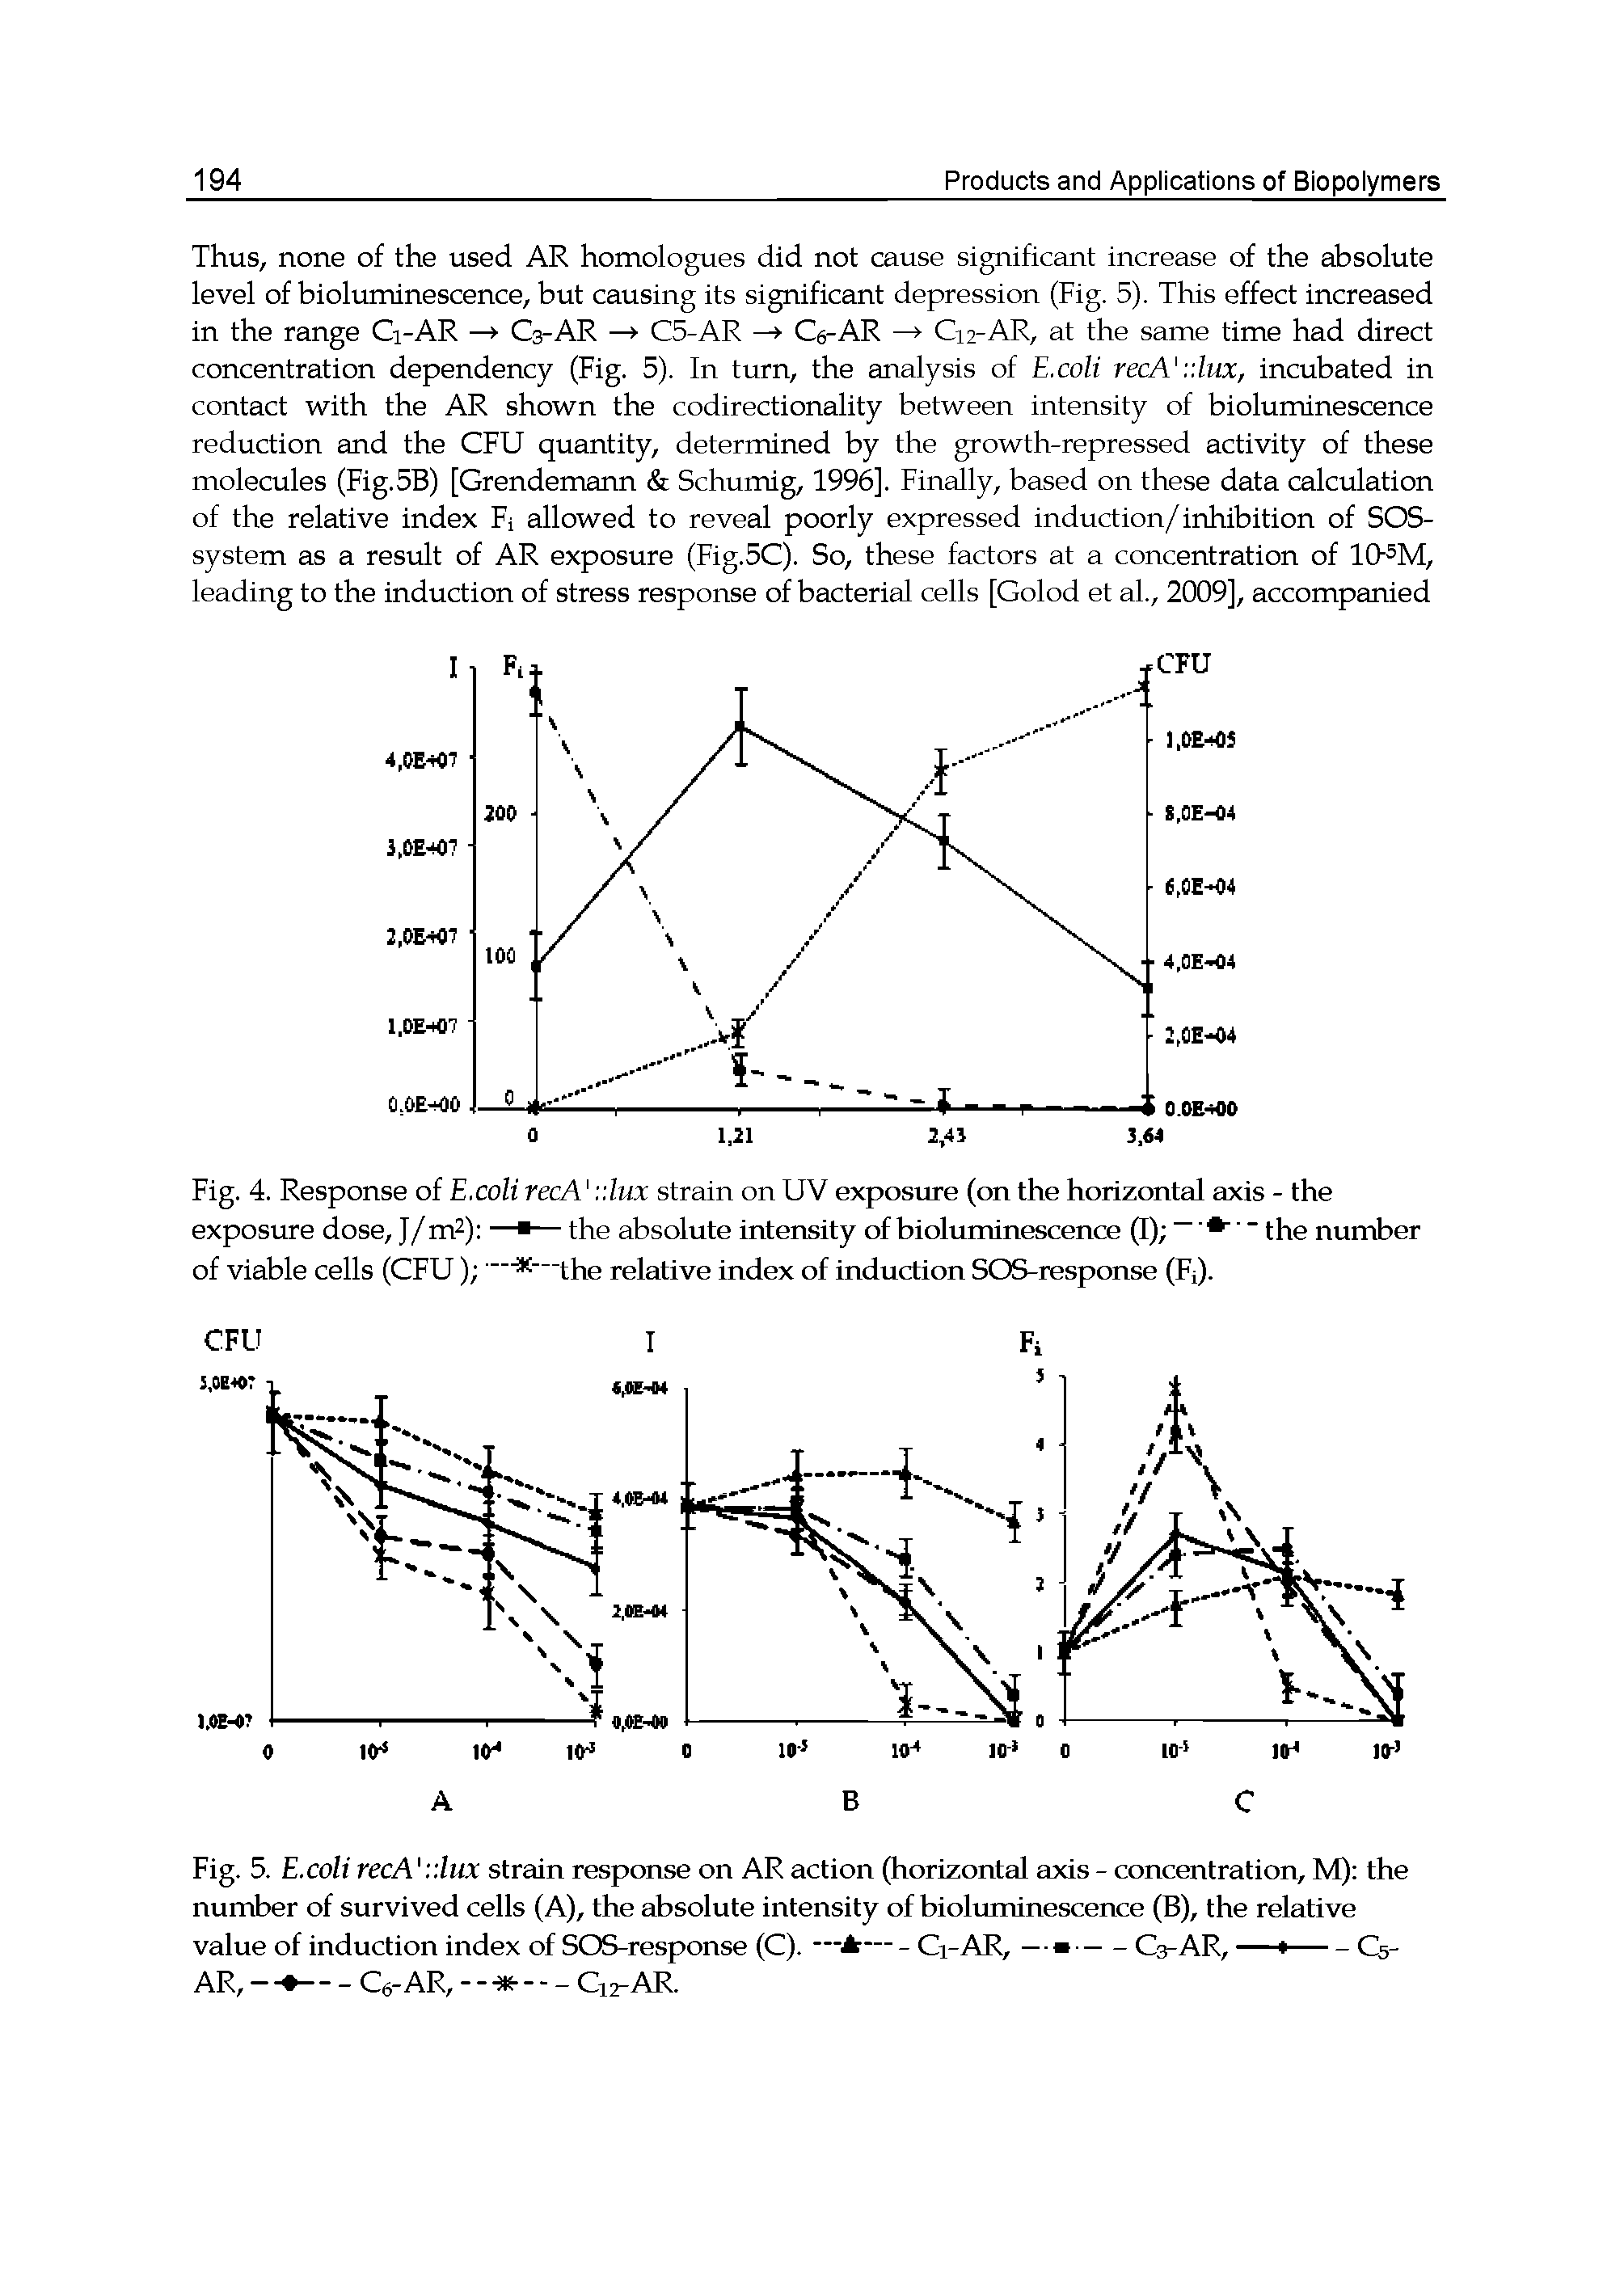 Fig. 4. Response of E.coU recA y.lux strain on UV exposure (on the horizontal axis - the exposure dose, J/m ) — — the absolute intensity of bioluminescence (I) " the number...